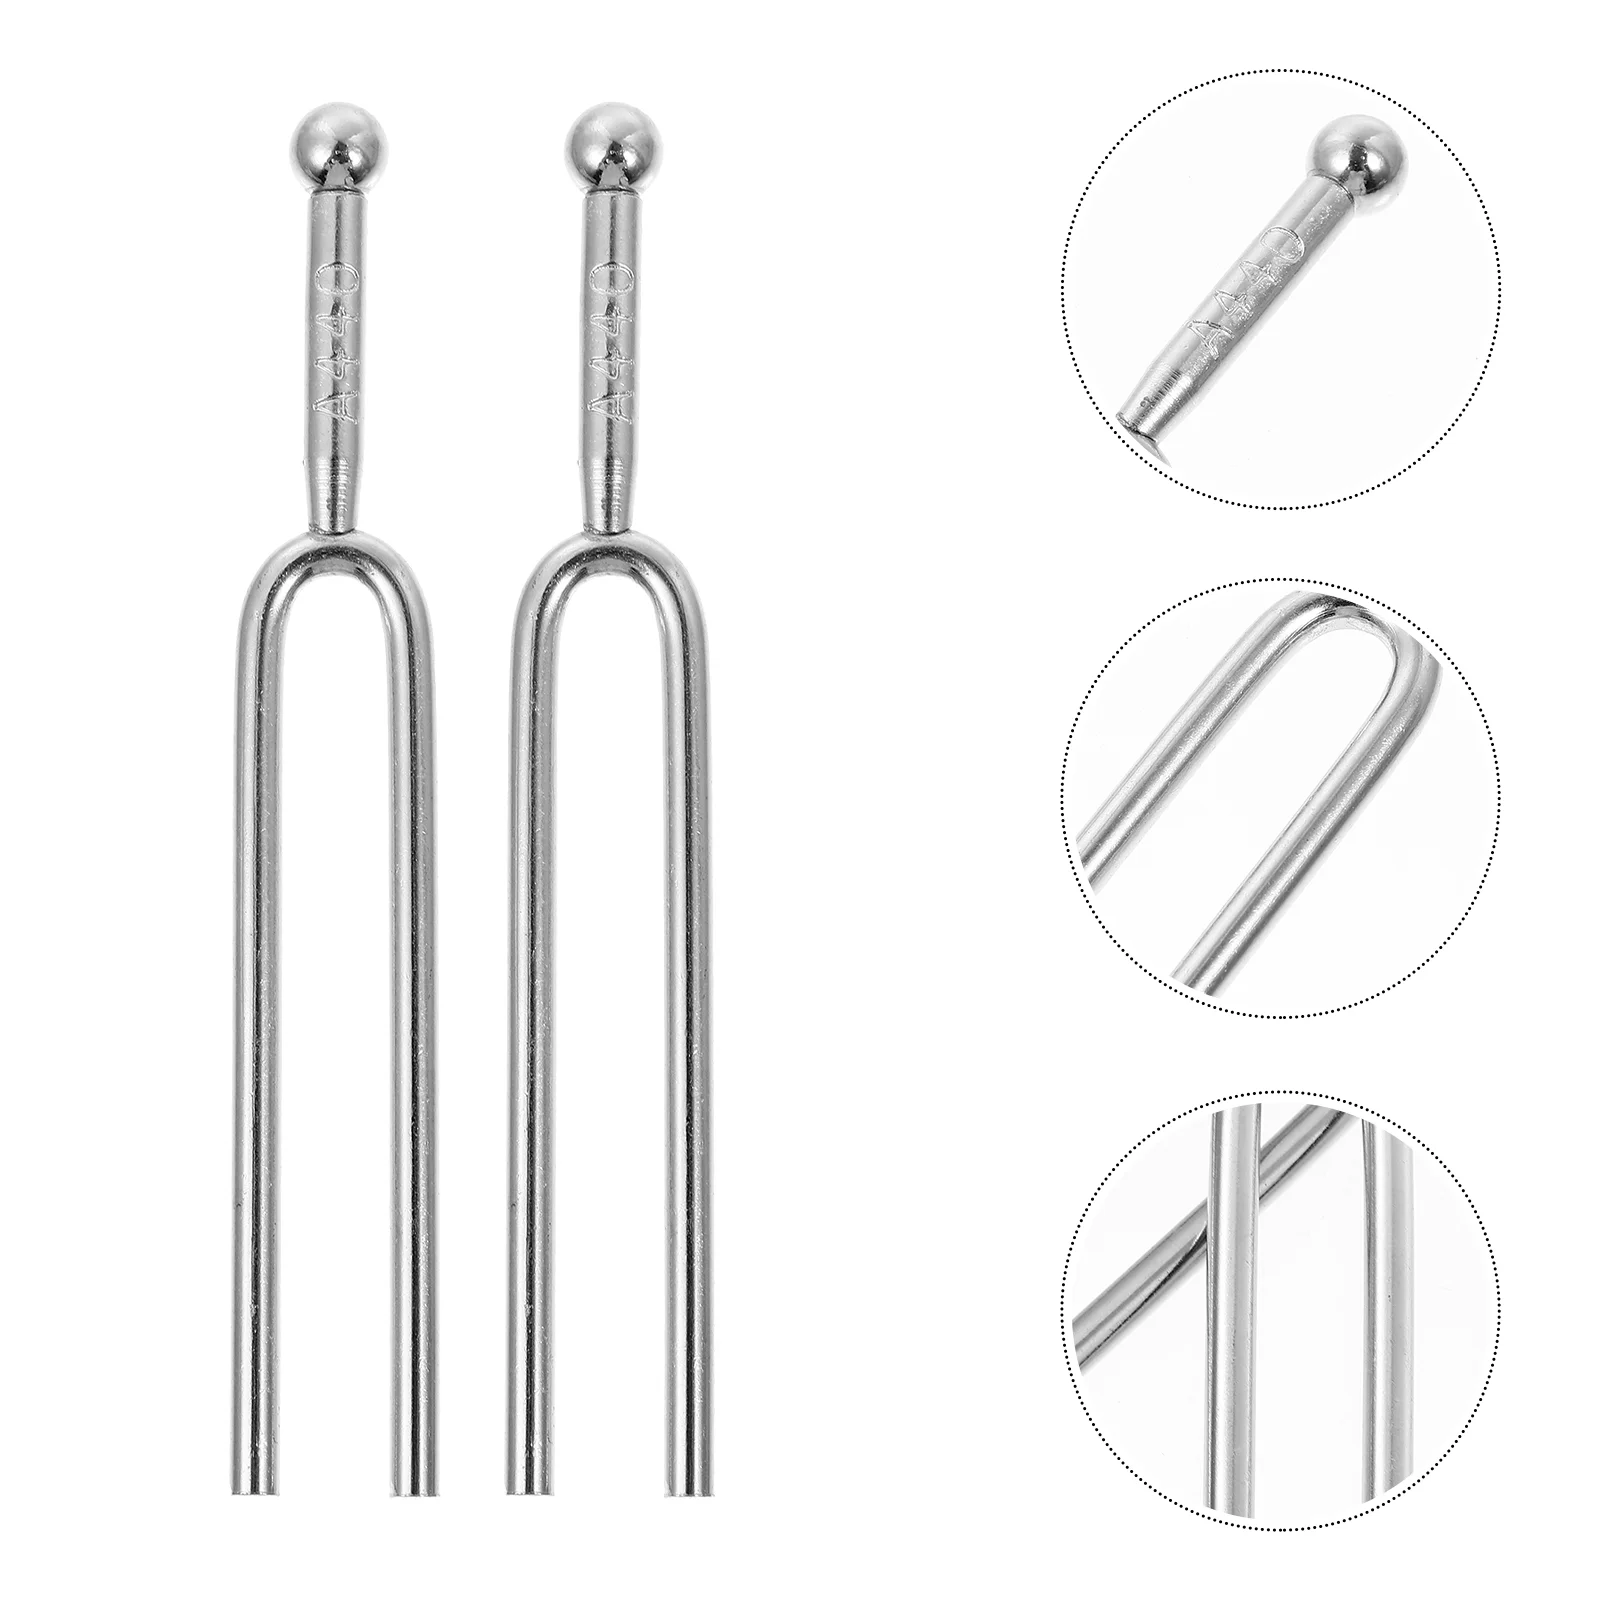 

2Pcs Tuning Fork Musical Instruments A 440hz Tuning Forks Tuner Fork for Violin Guitar Instrument Tuning Device